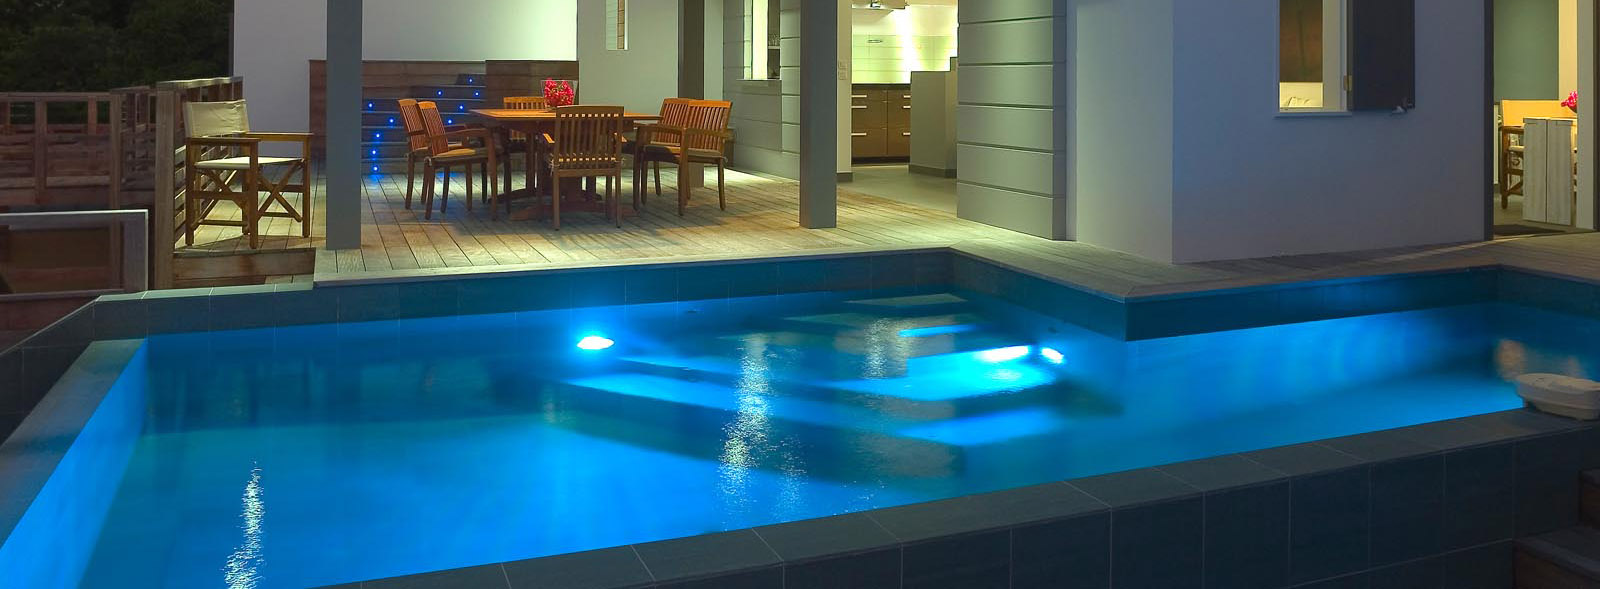 swimming pool led lights and lighting in atlantic seaboard and southern suburbs cape town